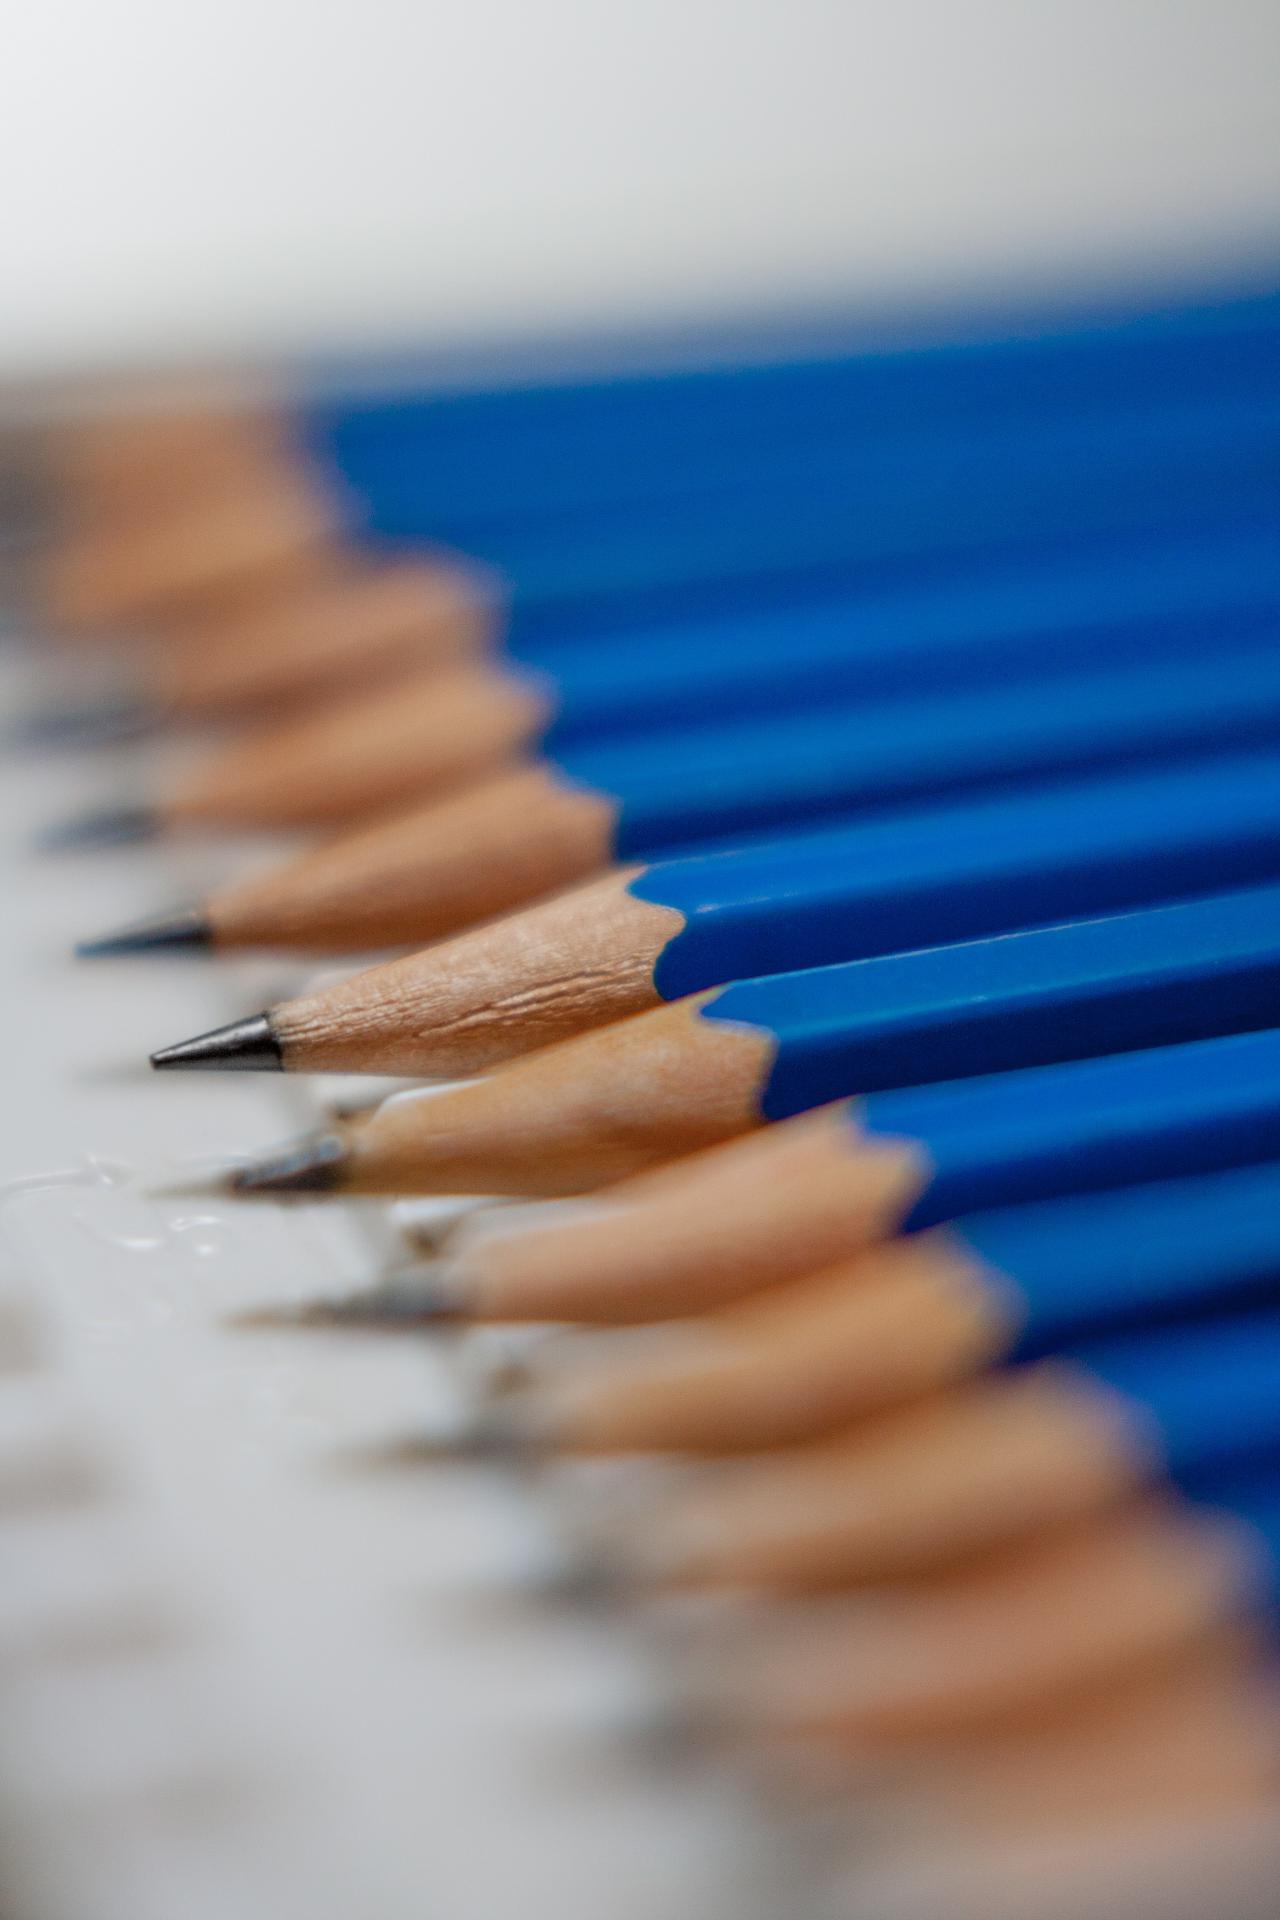 Image of pencils from pixabay